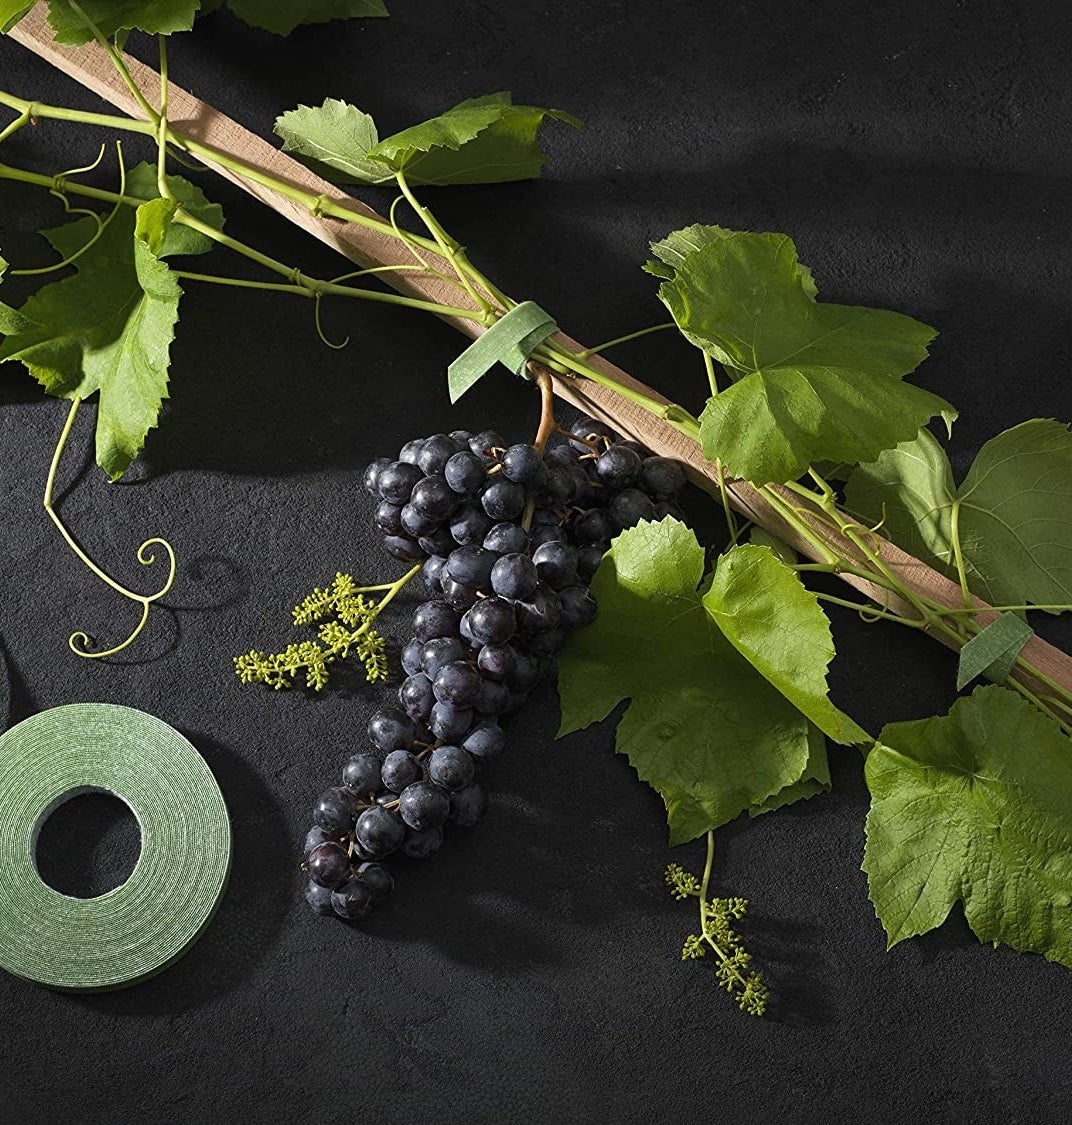 A roll of garden tape on a sprig of grapes